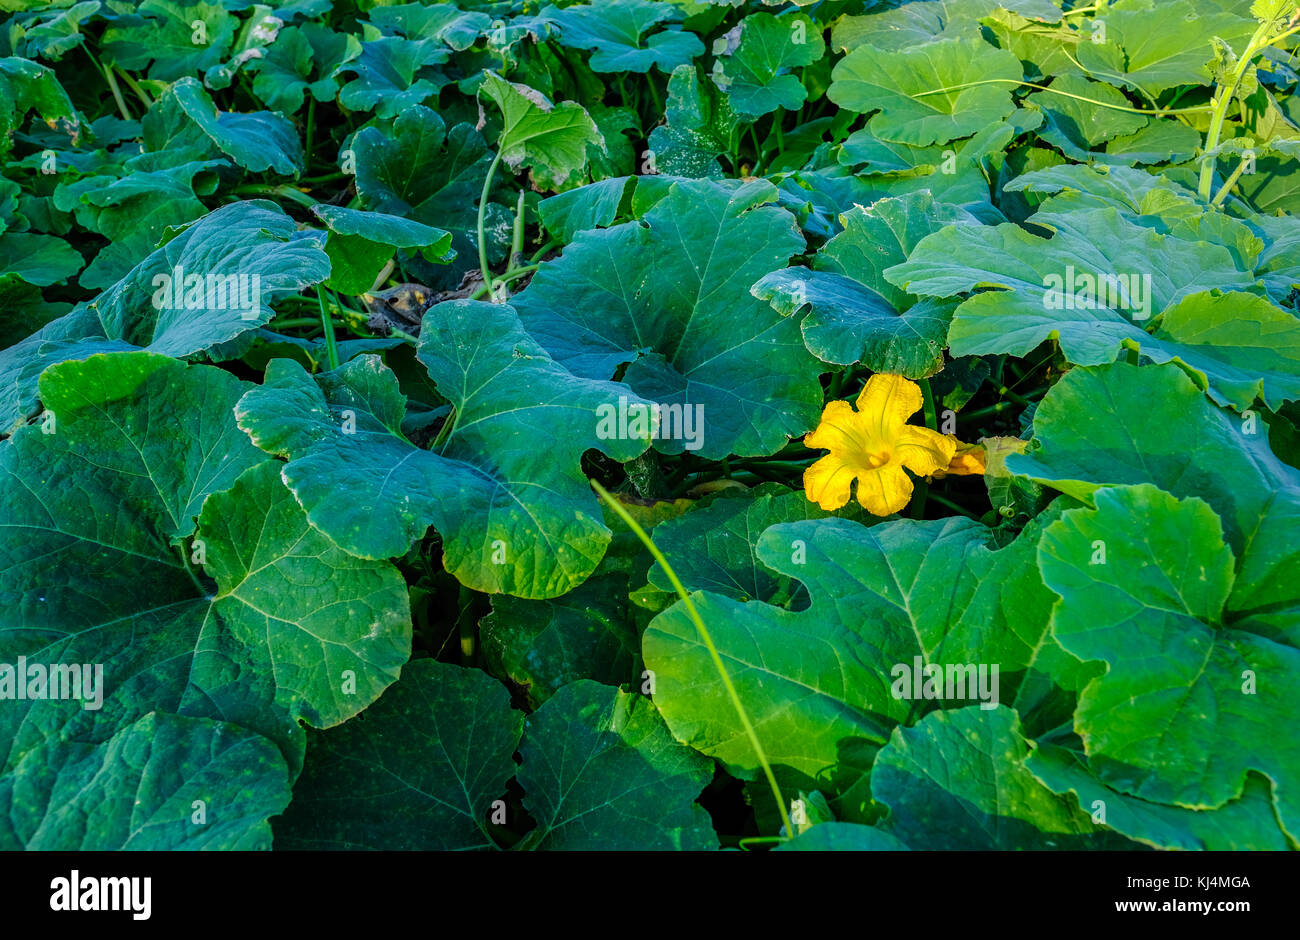 Marrow foliage with one yellow flower.  Shot taken at the allotment. An autumn shot. Stock Photo